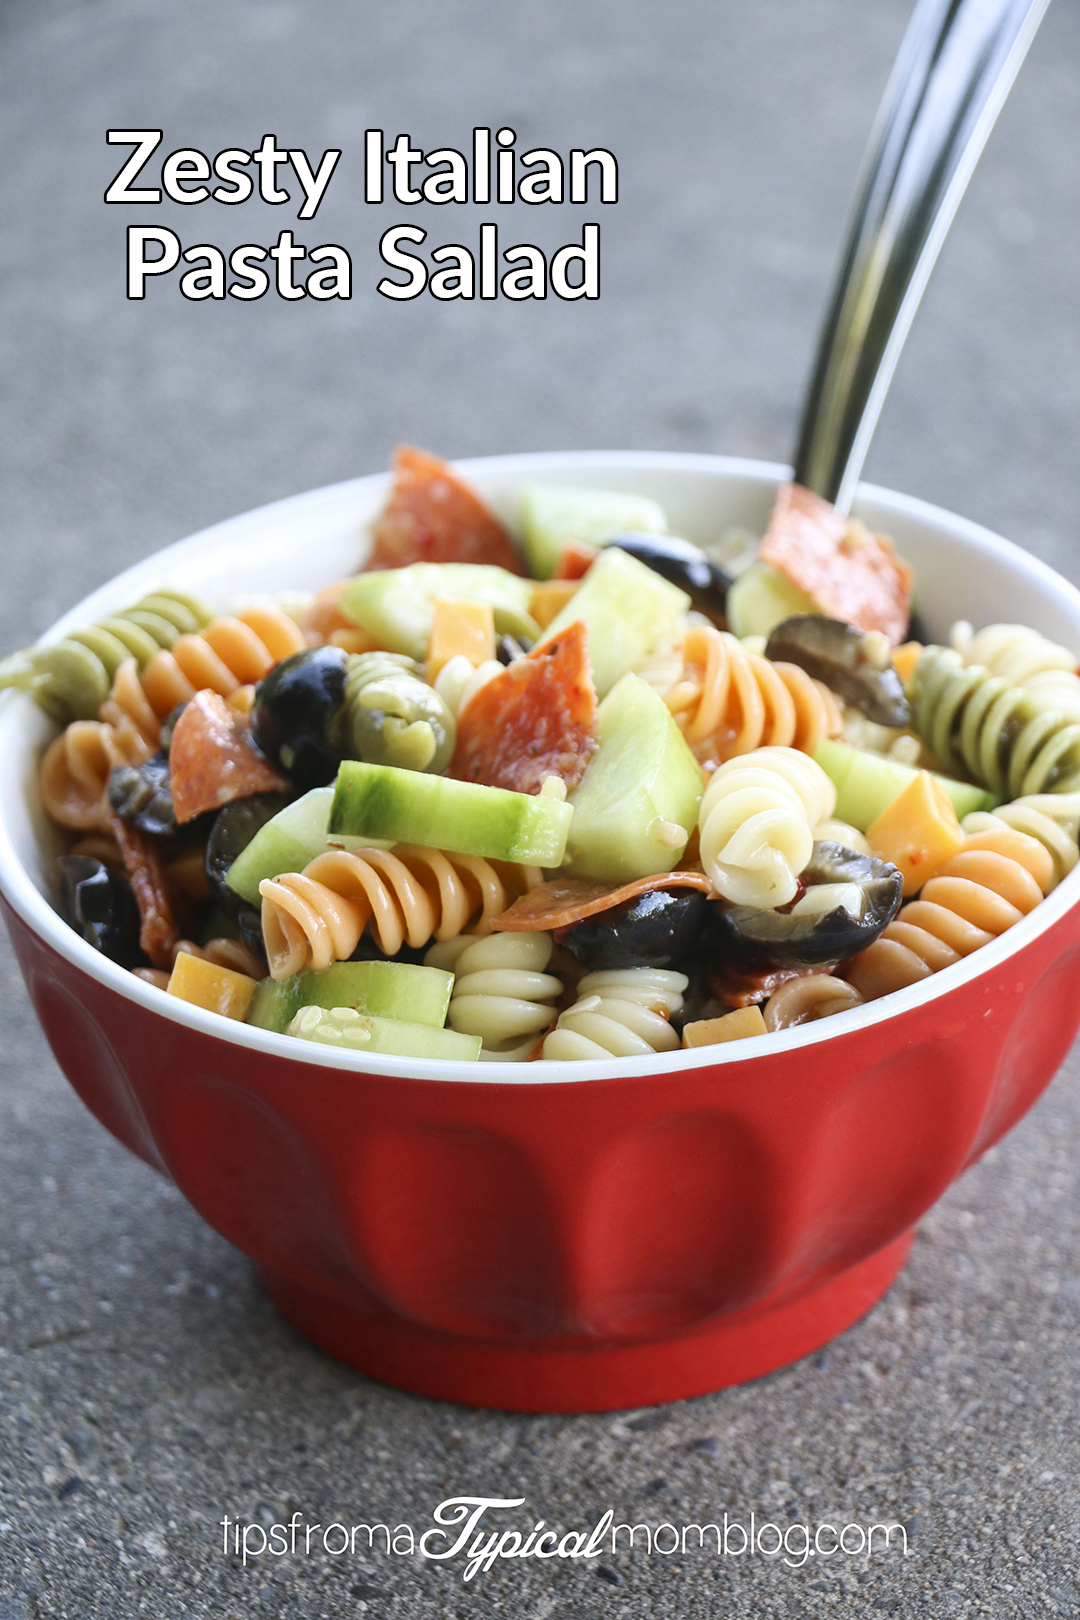 Easy Zesty Italian Pasta Salad Recipe - Tips from a Typical Mom